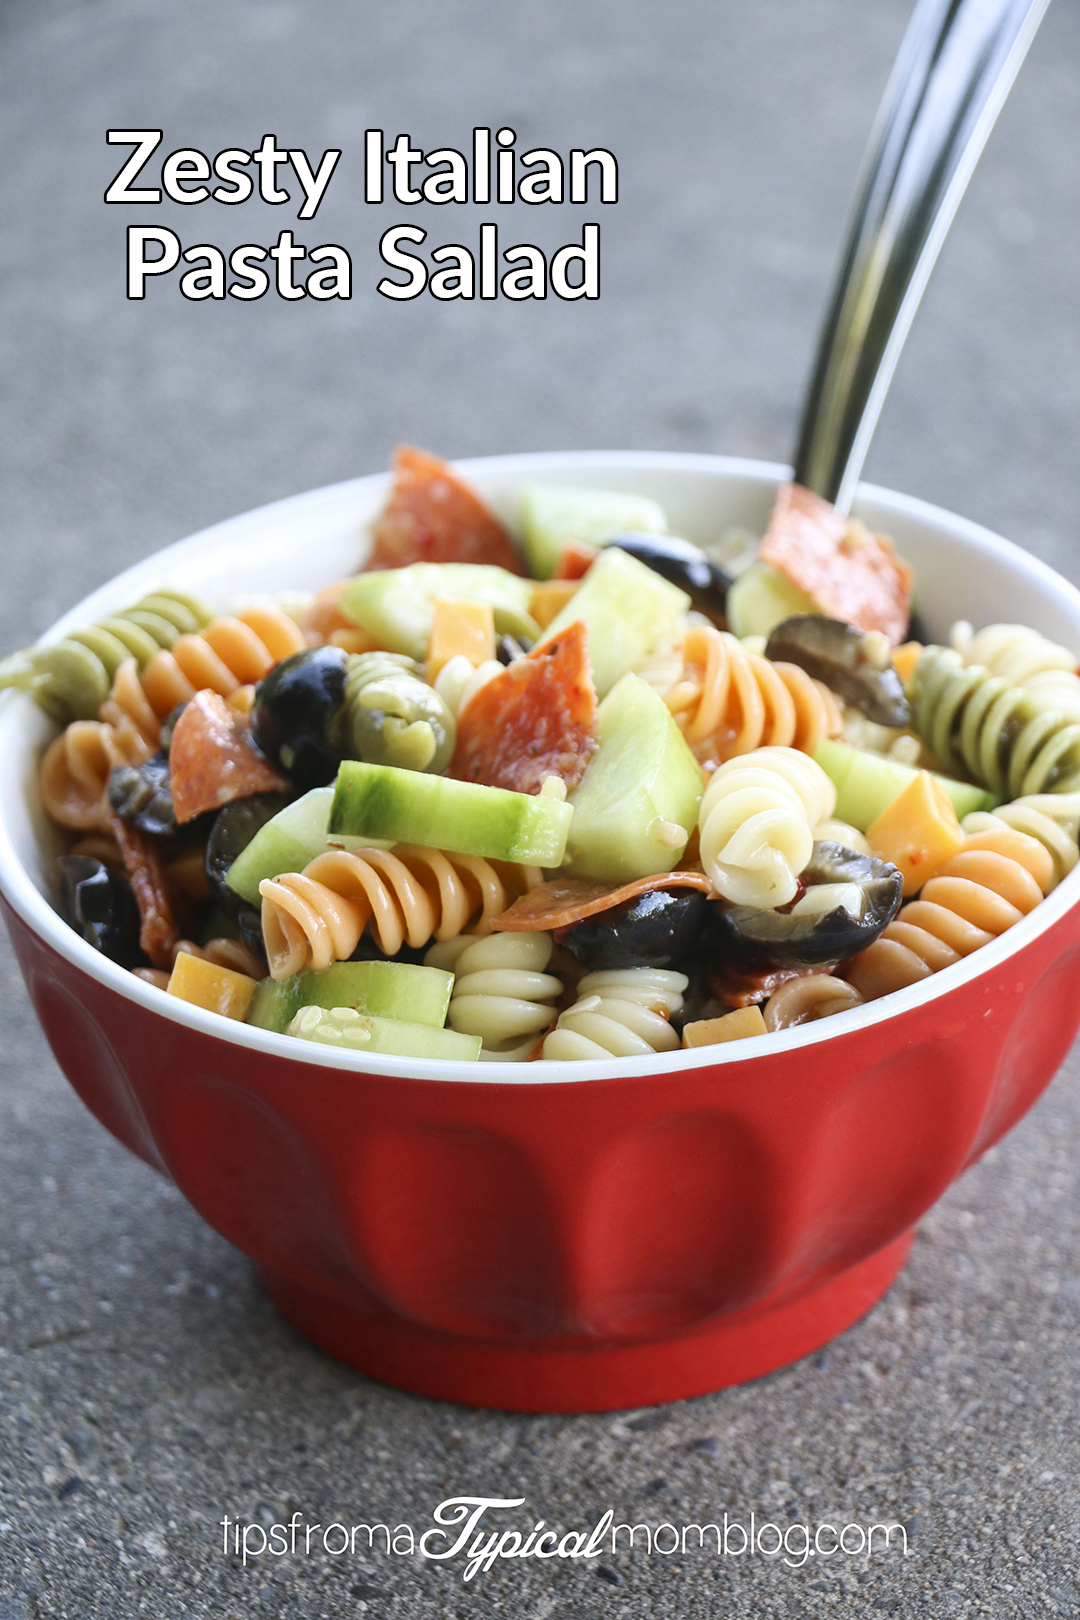 Easy Zesty Italian Pasta Salad Recipe - Tips from a Typical Mom